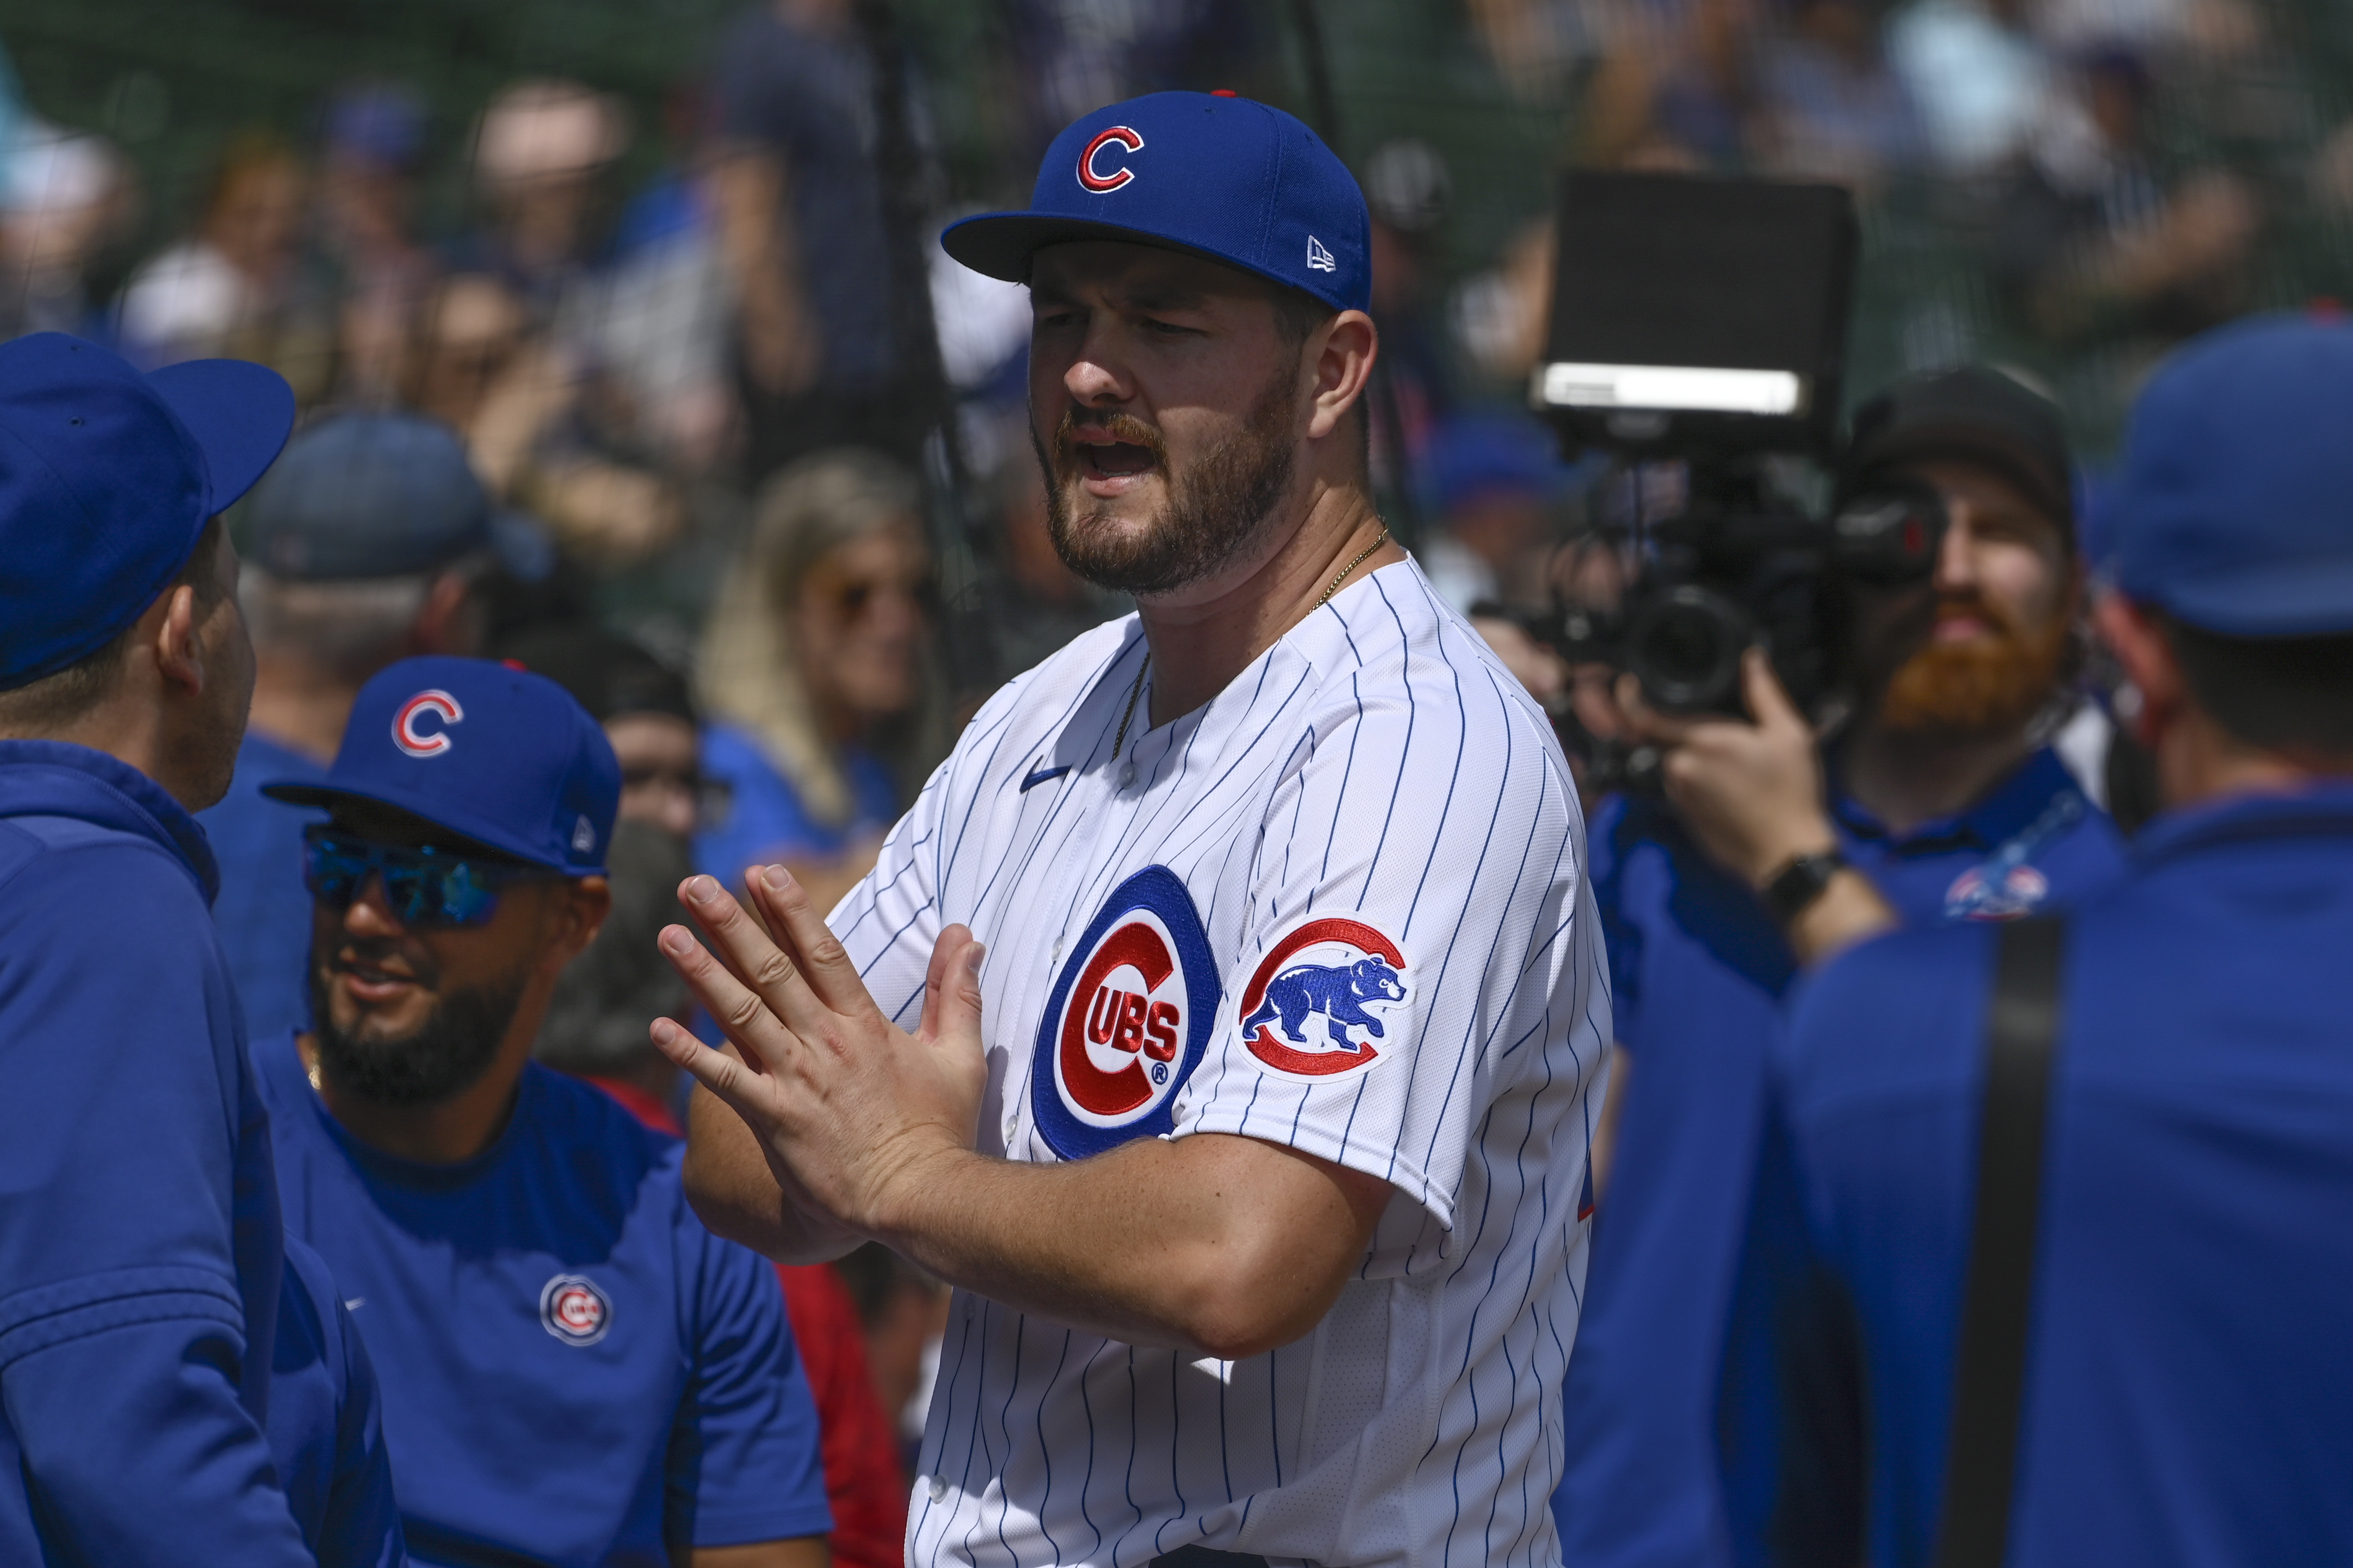 Chicago Cubs sweep San Francisco Giants behind Jordan Wicks' quality start  as younger players help in the postseason hunt